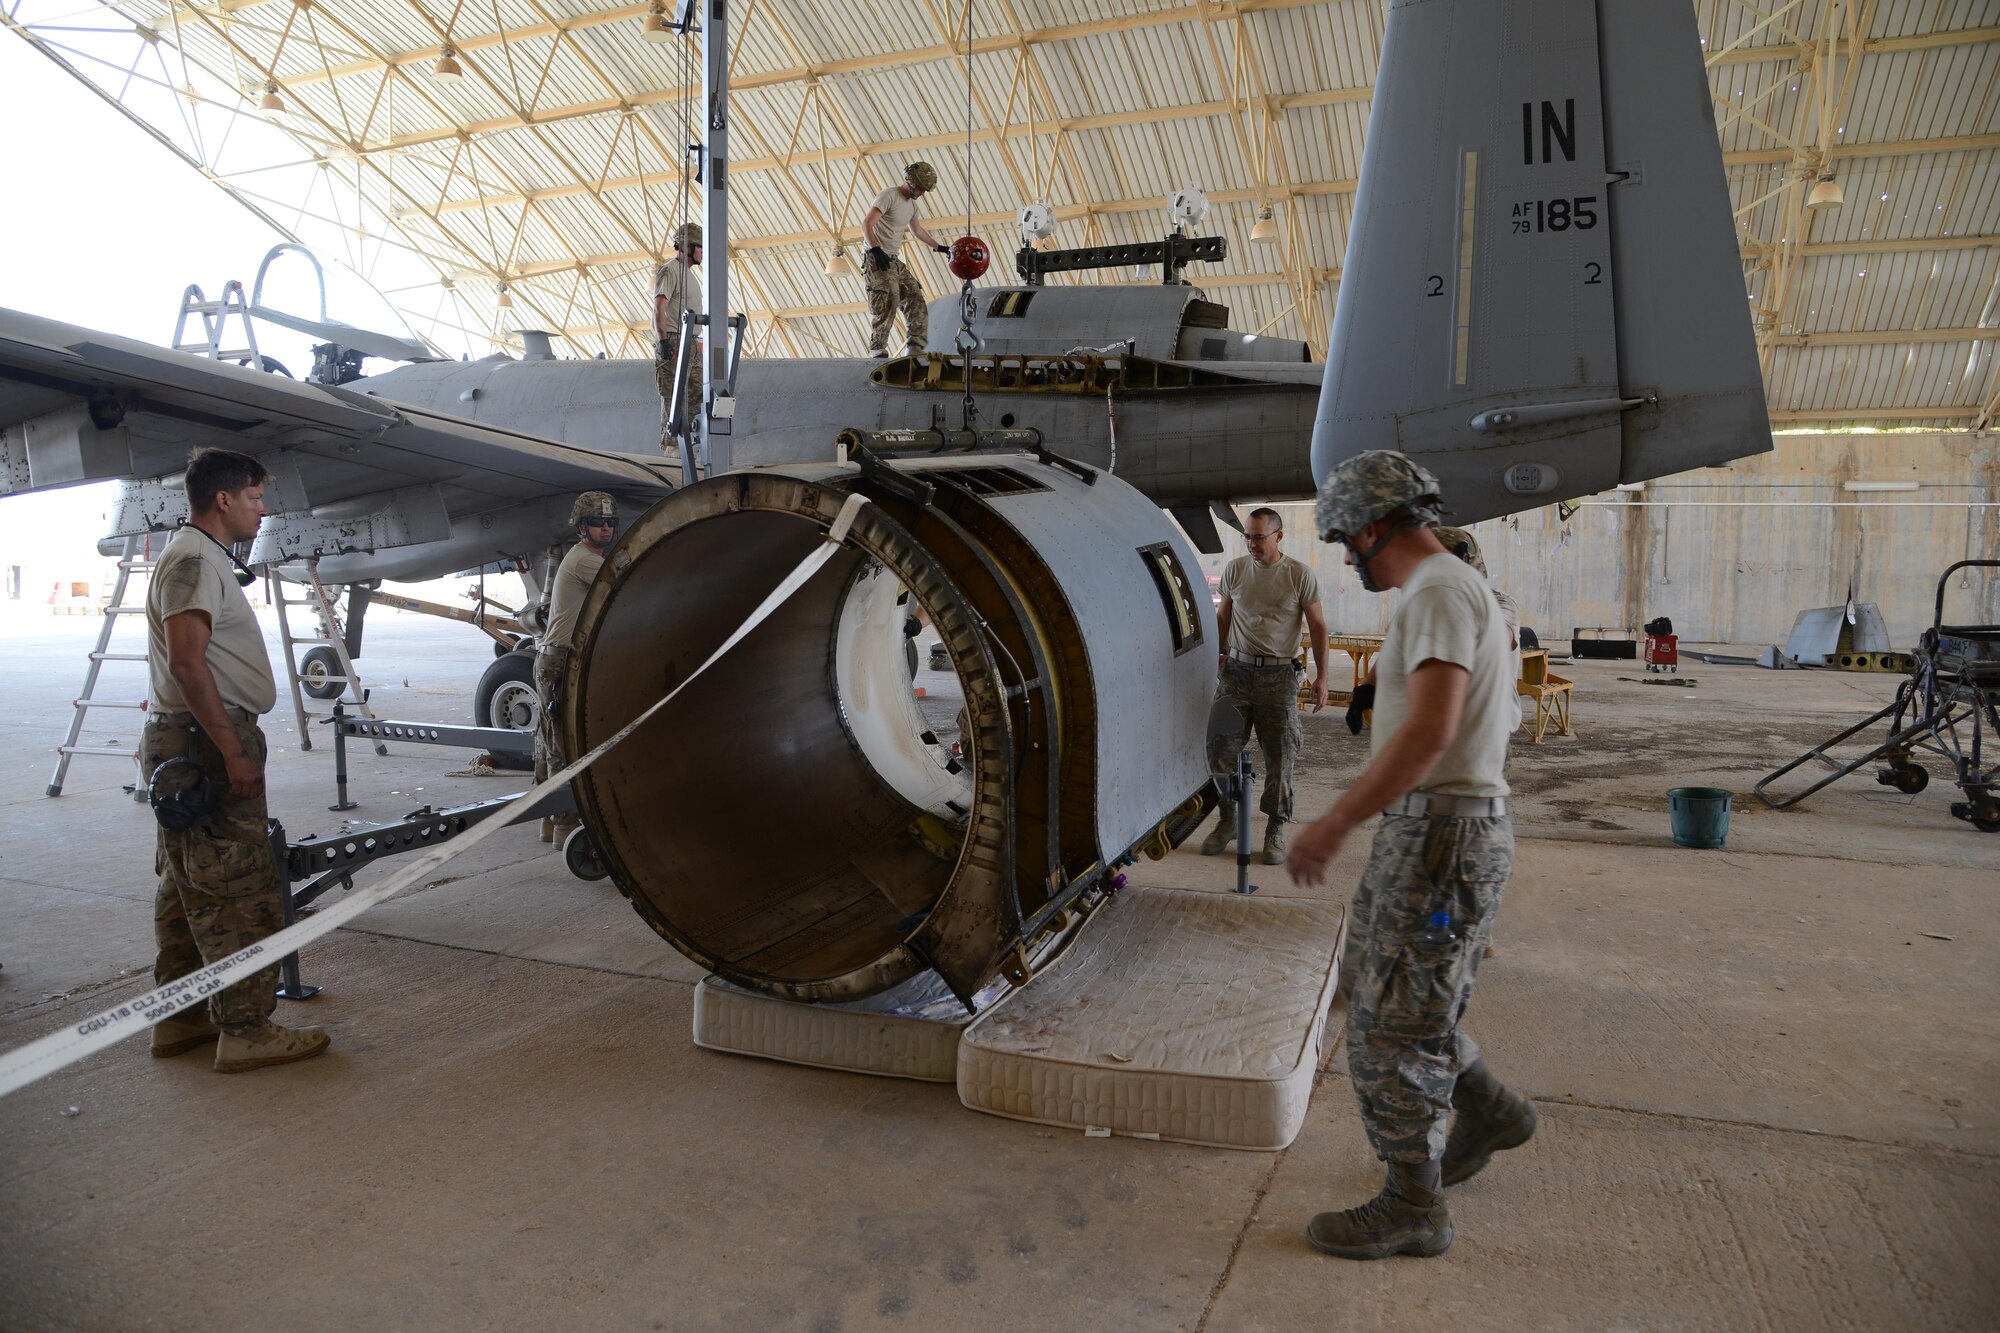 Airmen from the 332nd Expeditionary Maintenance Squadron remove a damaged nacelle, the protective covering on the engine, from an A-10C Thunderbolt II at Al Asad Air Base, Iraq. A maintenance response team from the 332nd EMXG repaired the jet and got it back in the air in less than five days after the jet suffered catastrophic engine failure and had to divert there. (U.S. Air Force photo by Tech. Sgt. Jared Marquis/released)